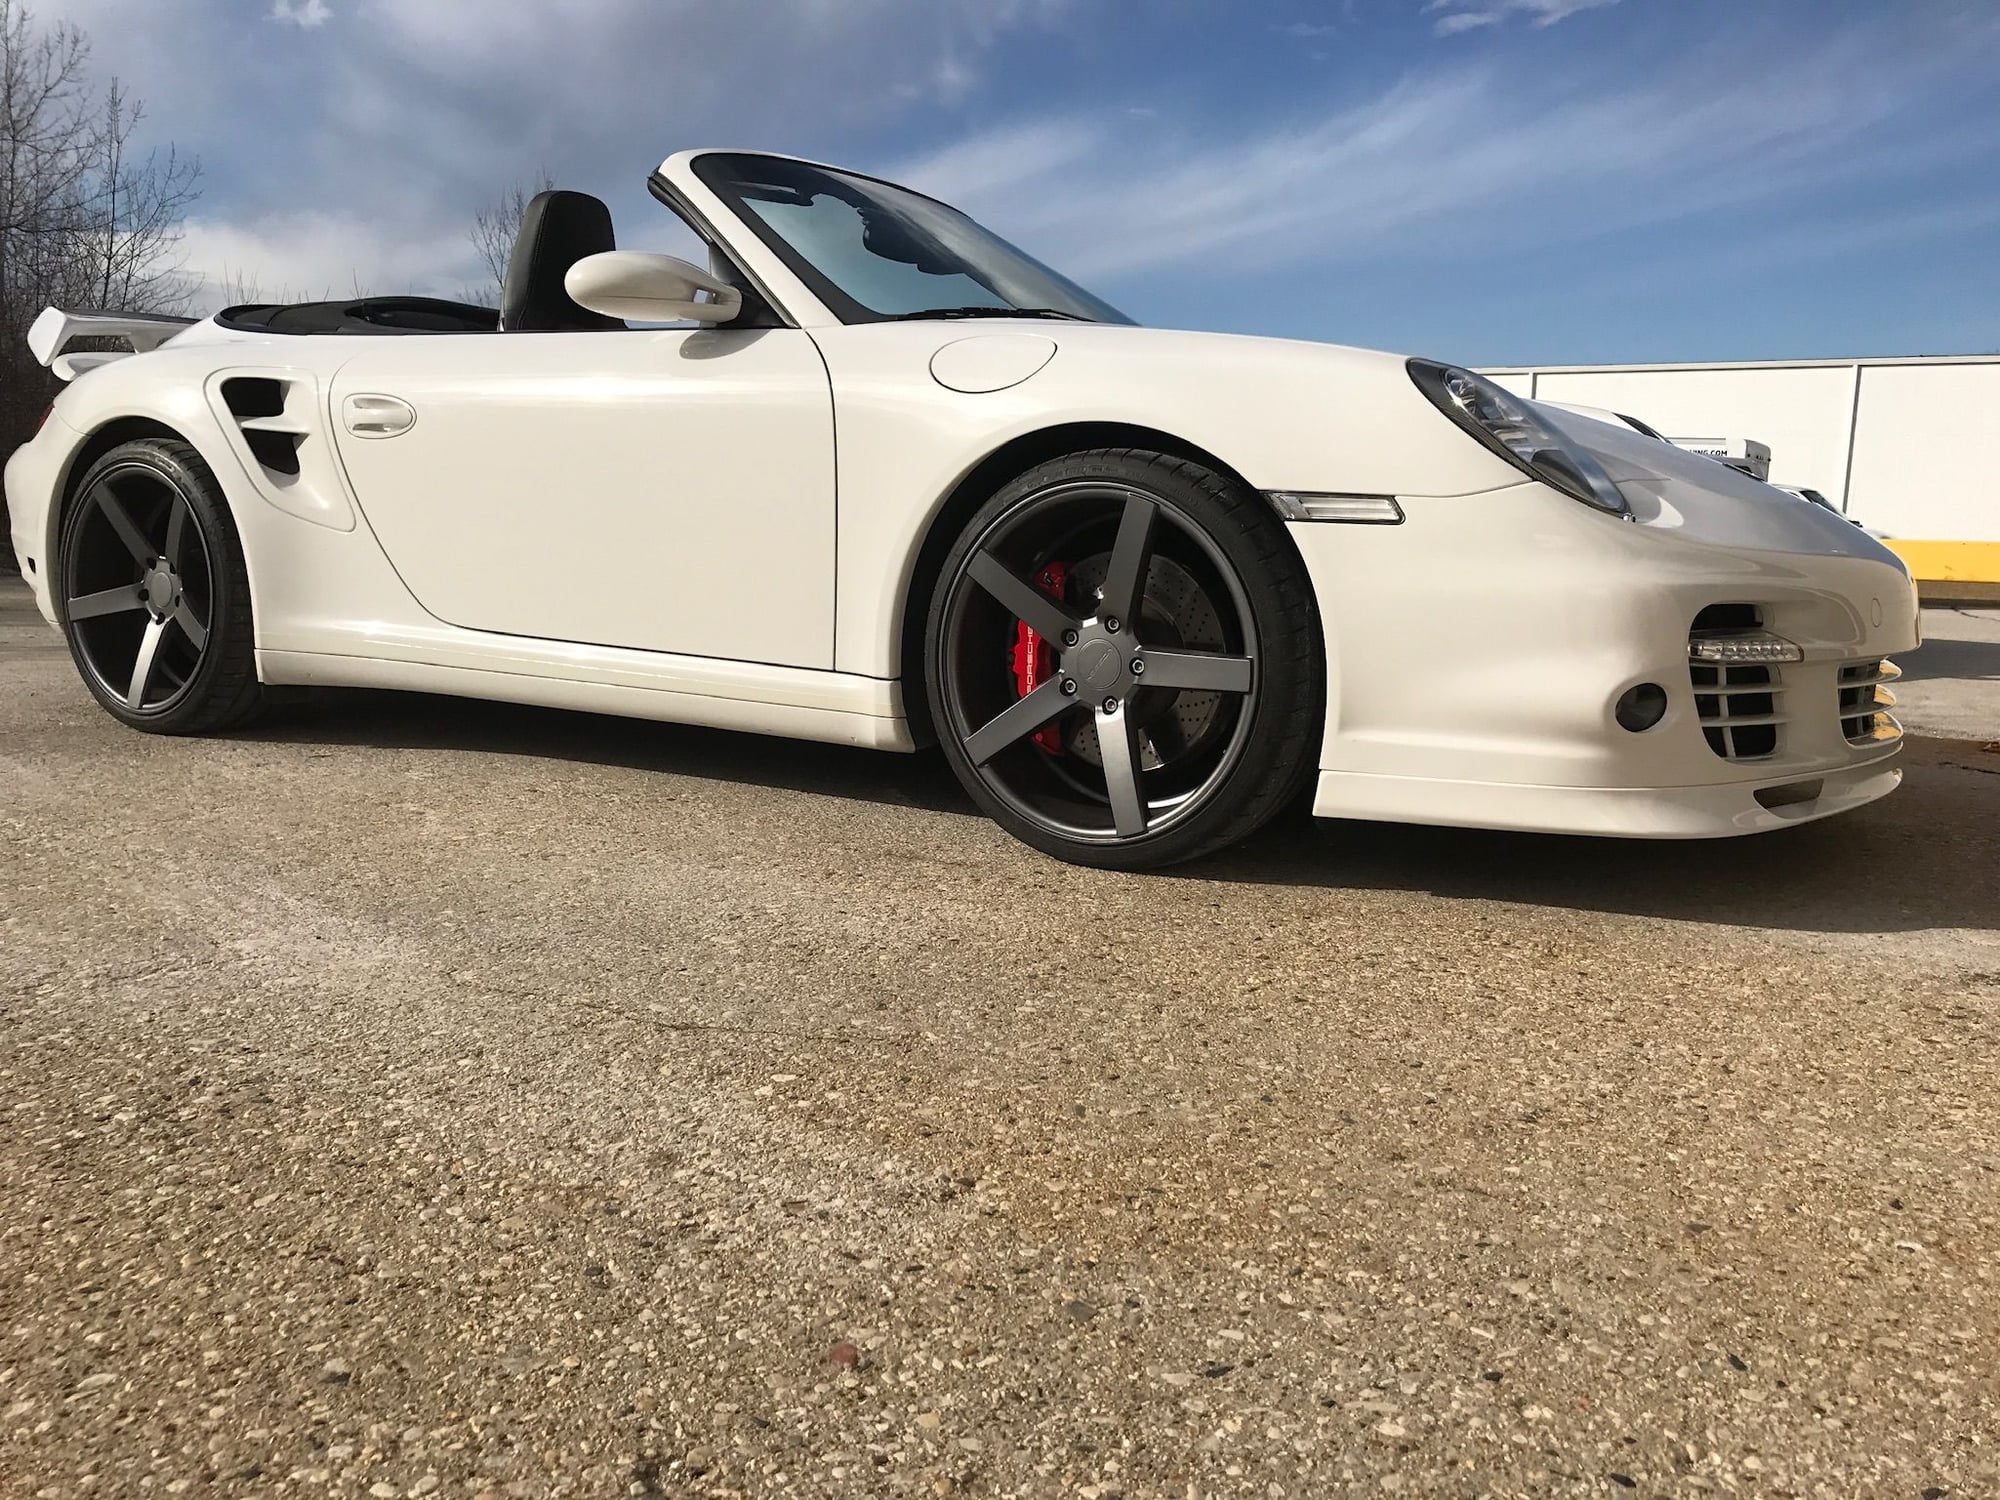 Wheels and Tires/Axles - Vossen CV3 Wheels with MPSS tire package 997 TT and C4 - Used - 2005 to 2013 Porsche 911 - Oshkosh, WI 54901, United States